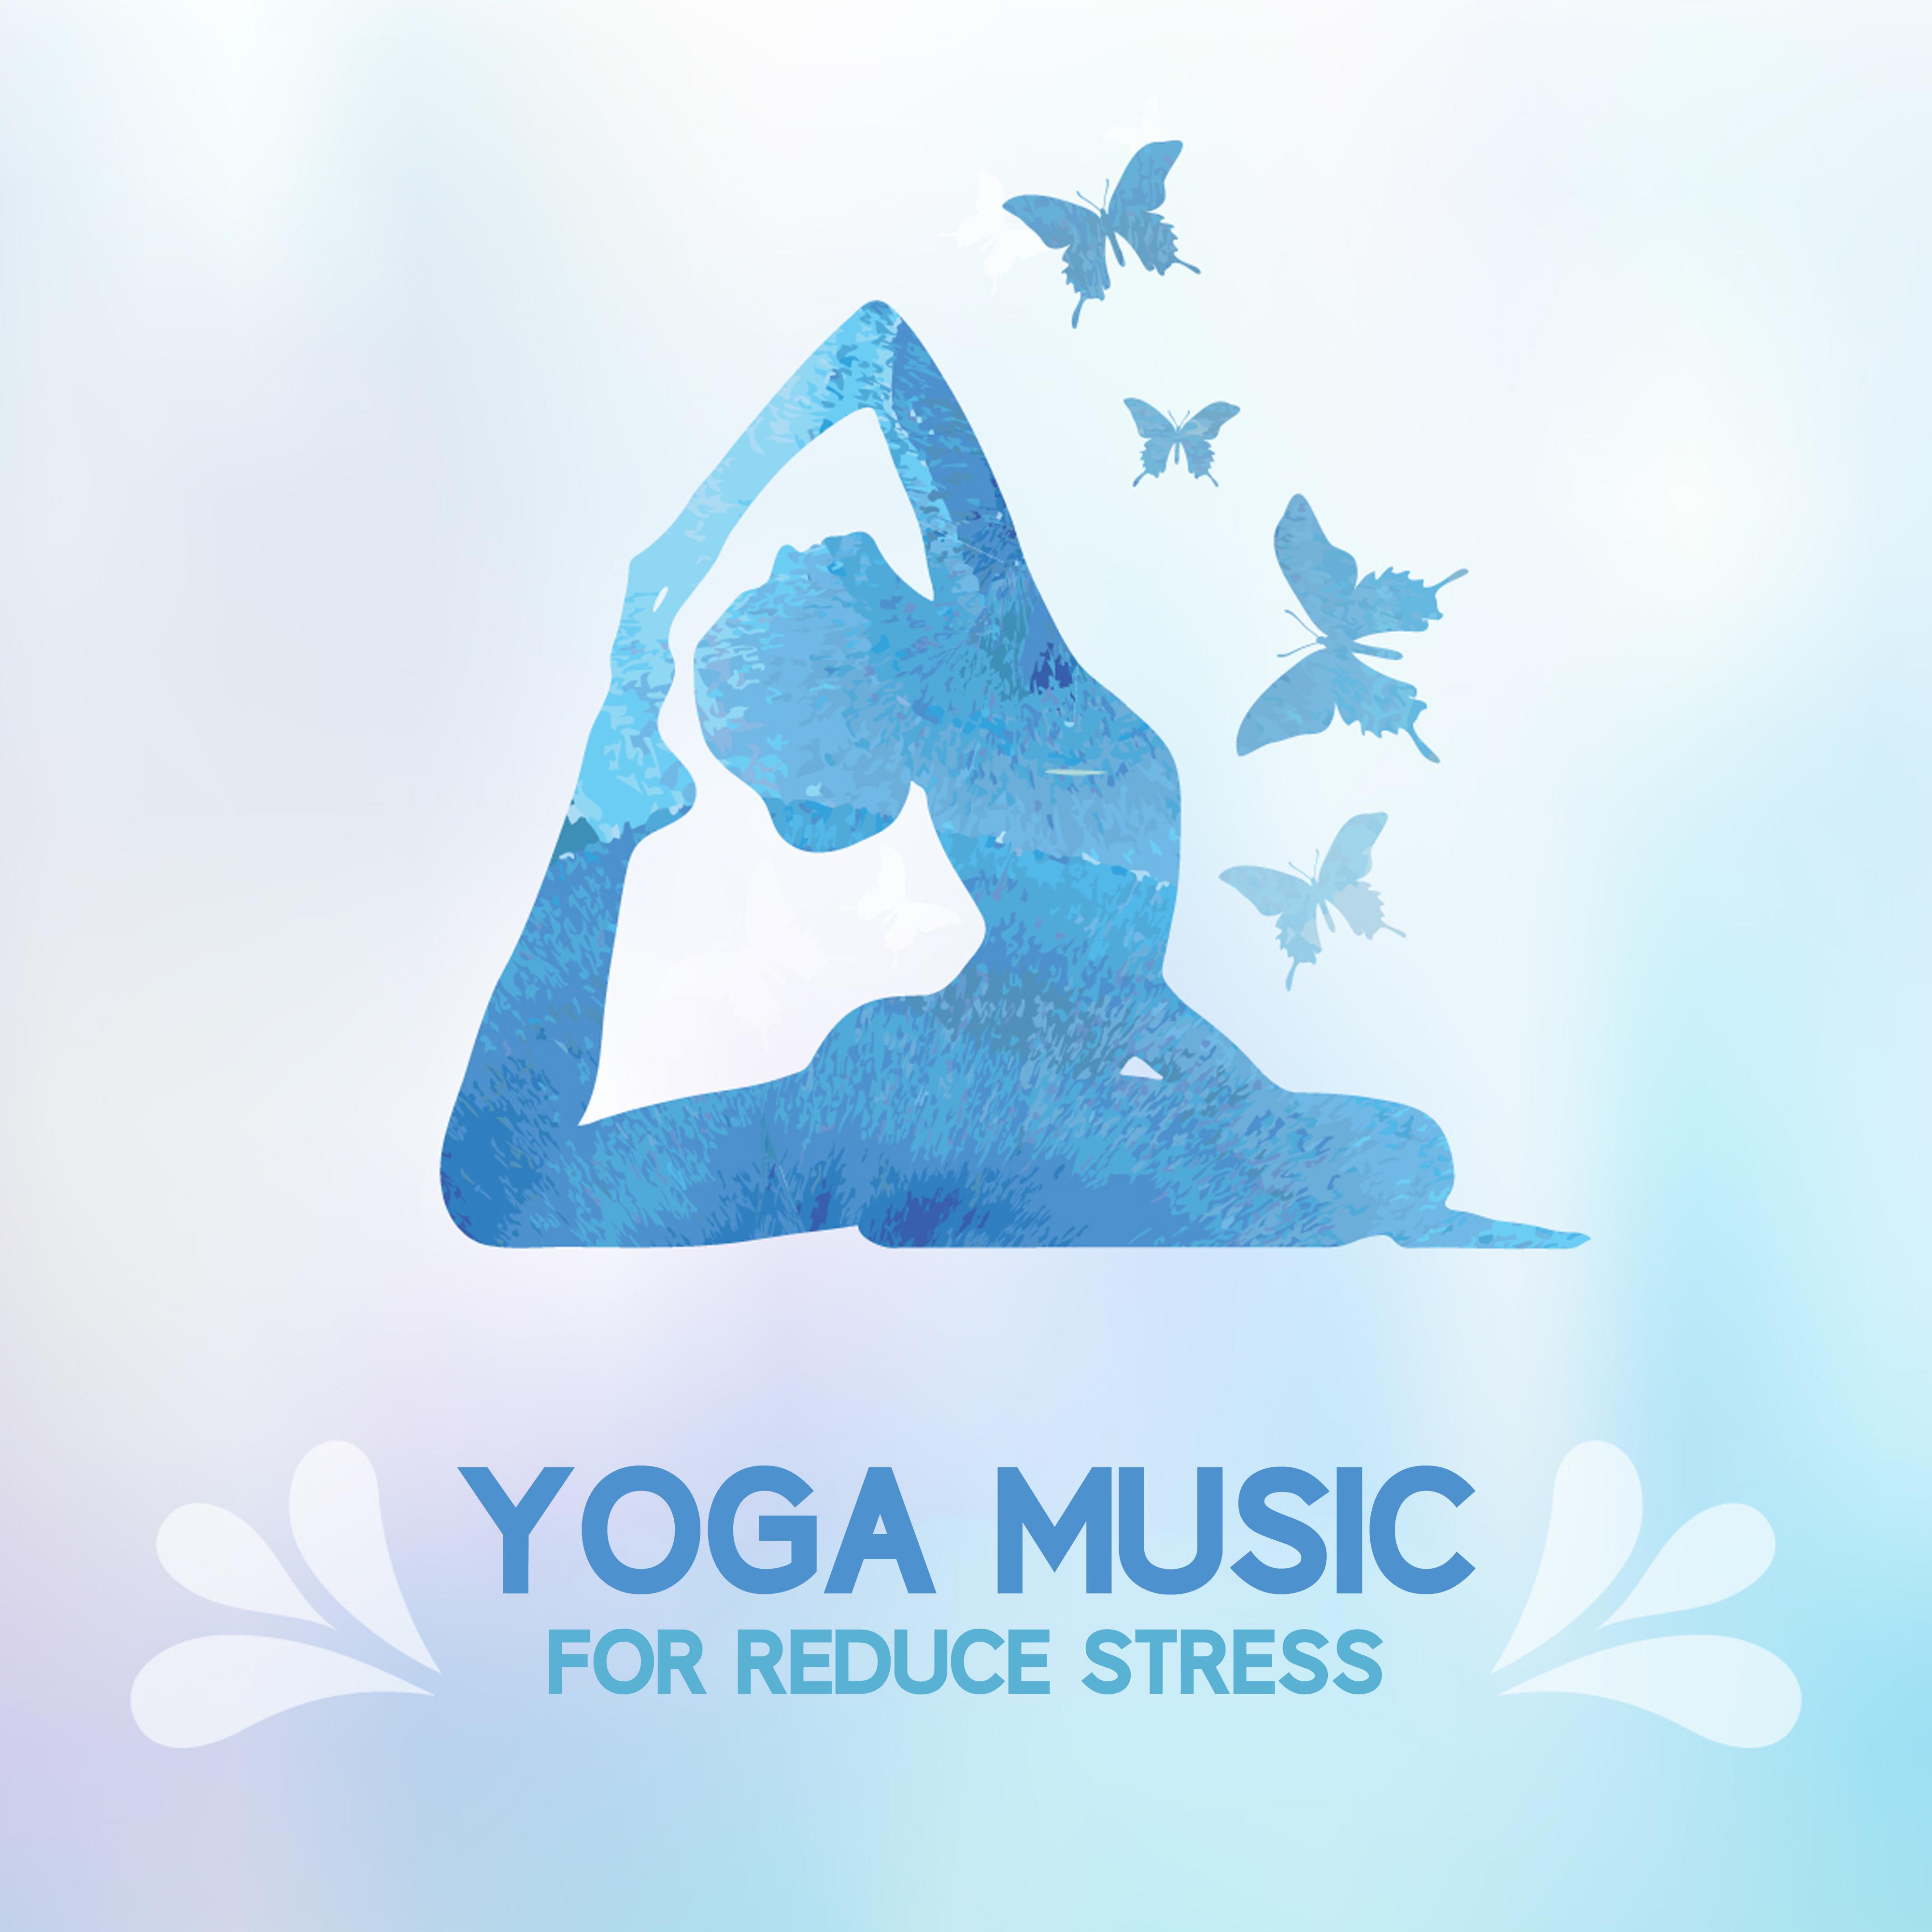 Yoga Music for Reduce Stress